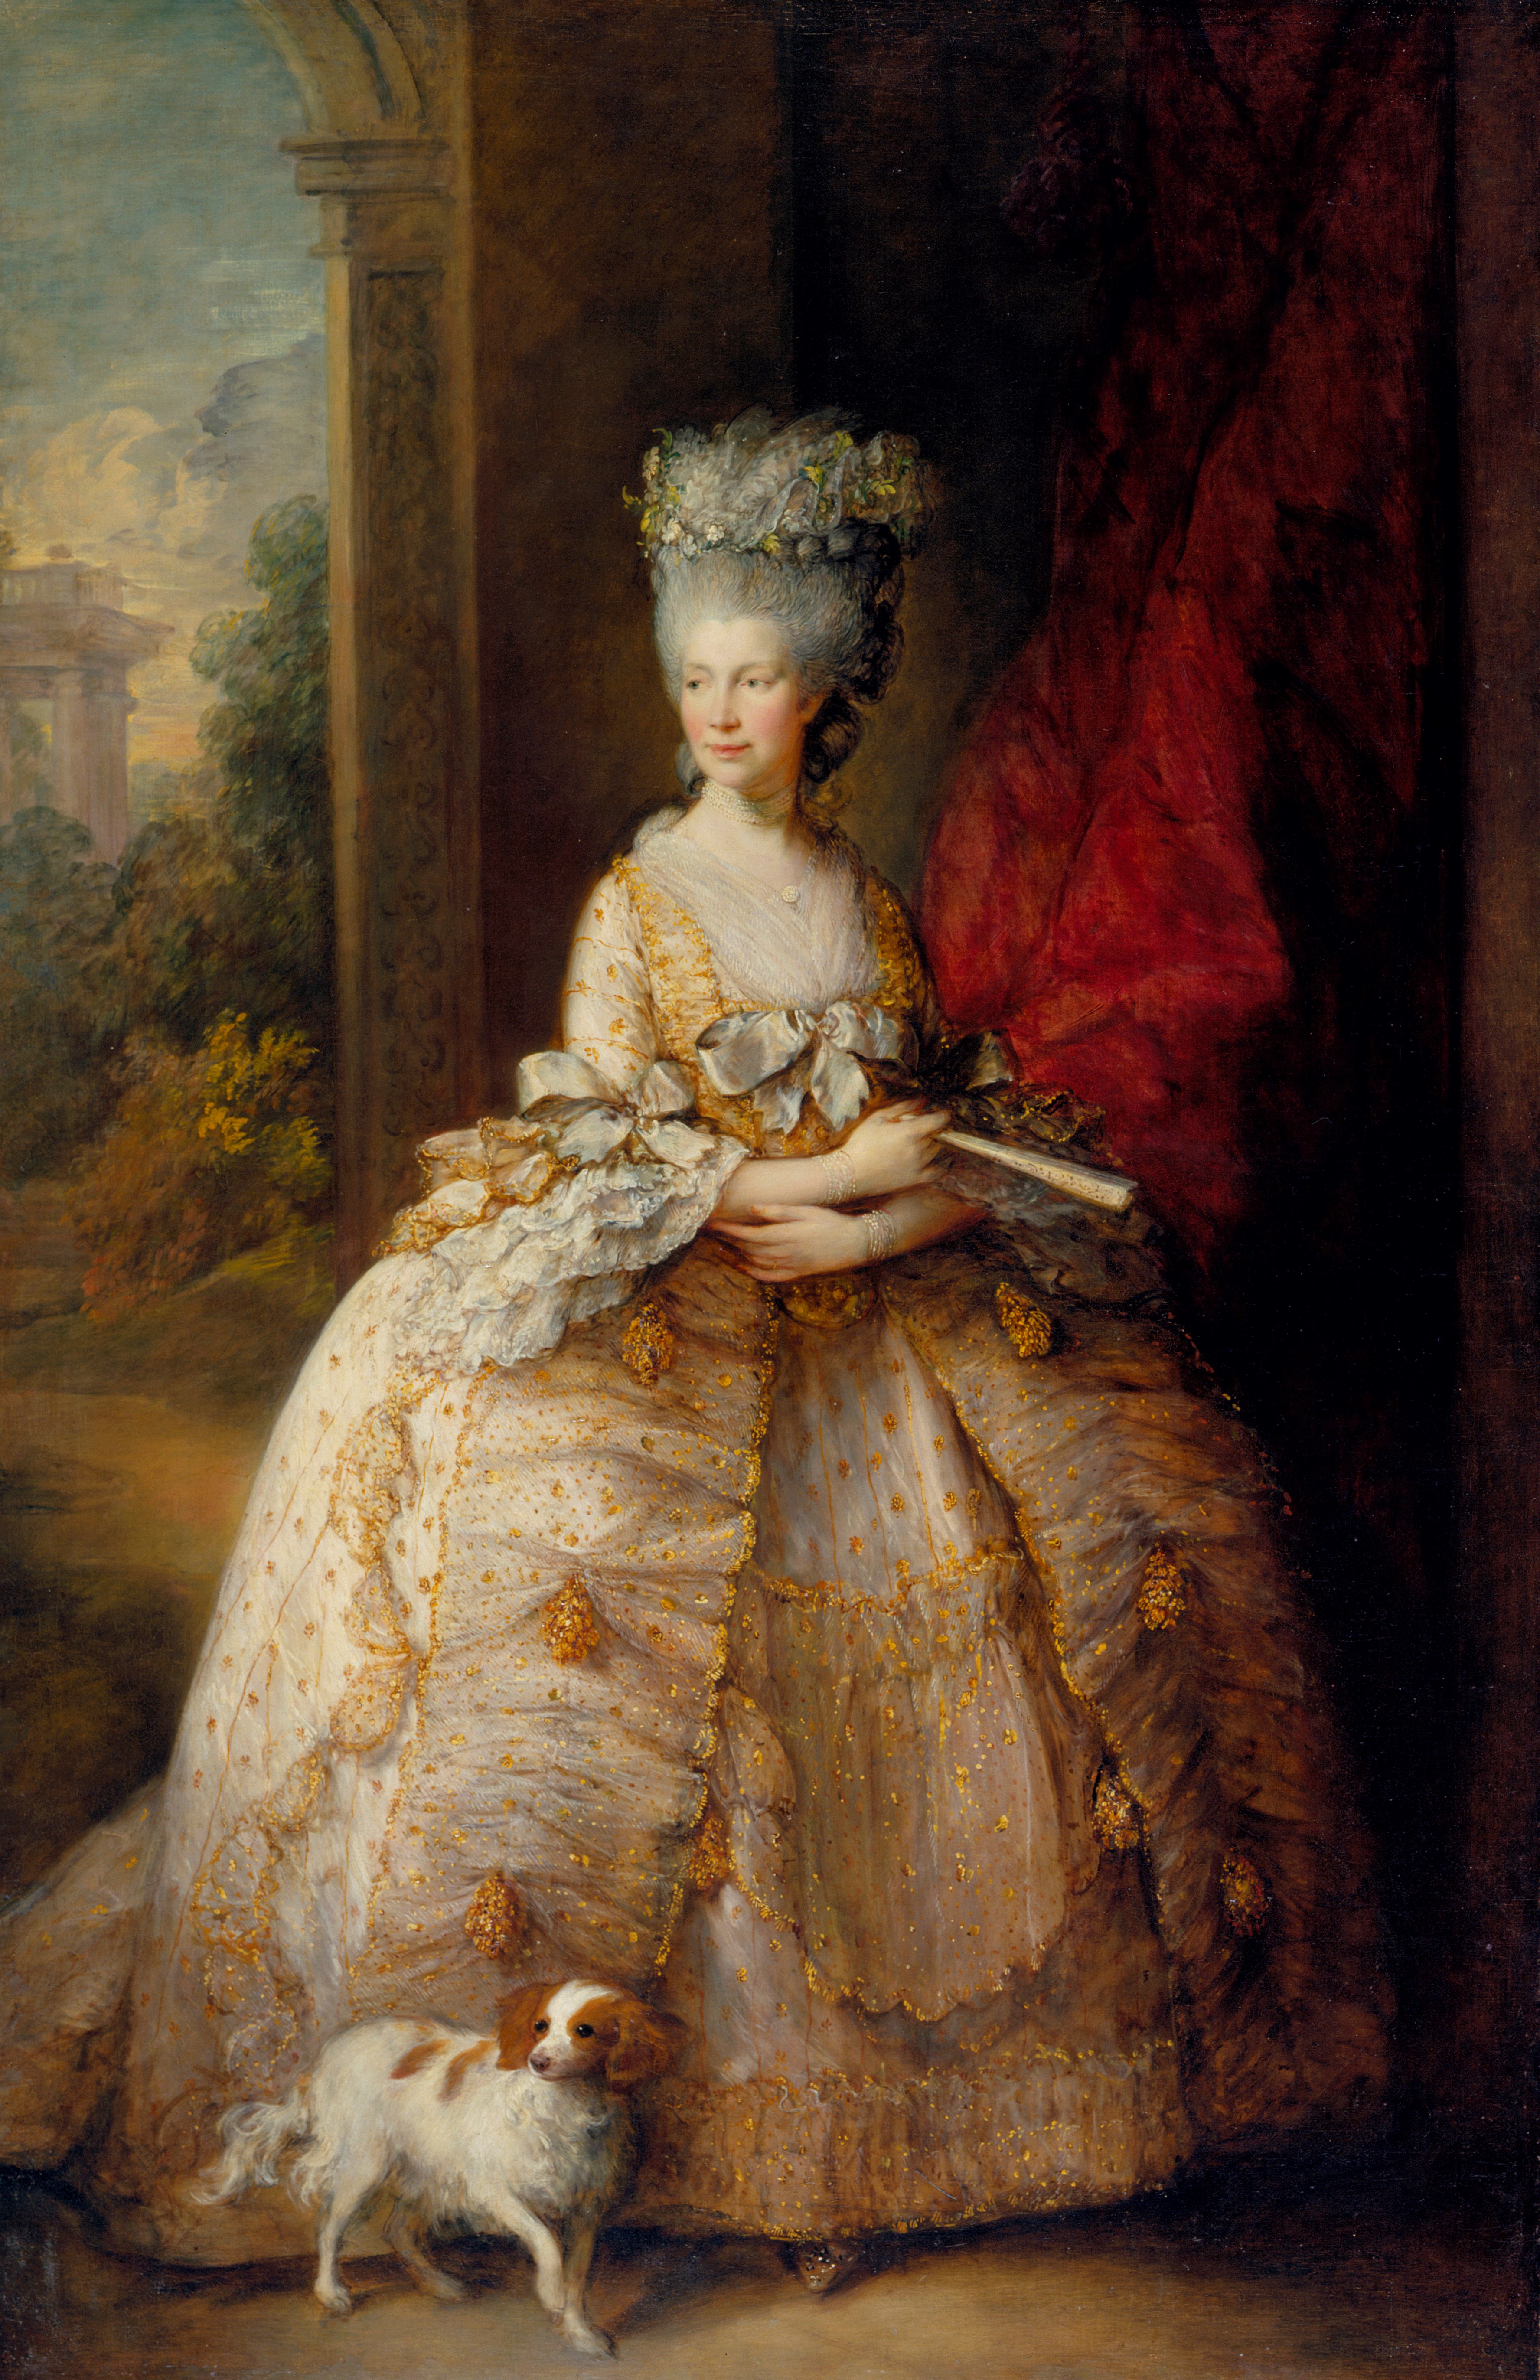 Portrait of Queen Charlotte by Thomas Gainsborough (1781). Image: Royal Collection